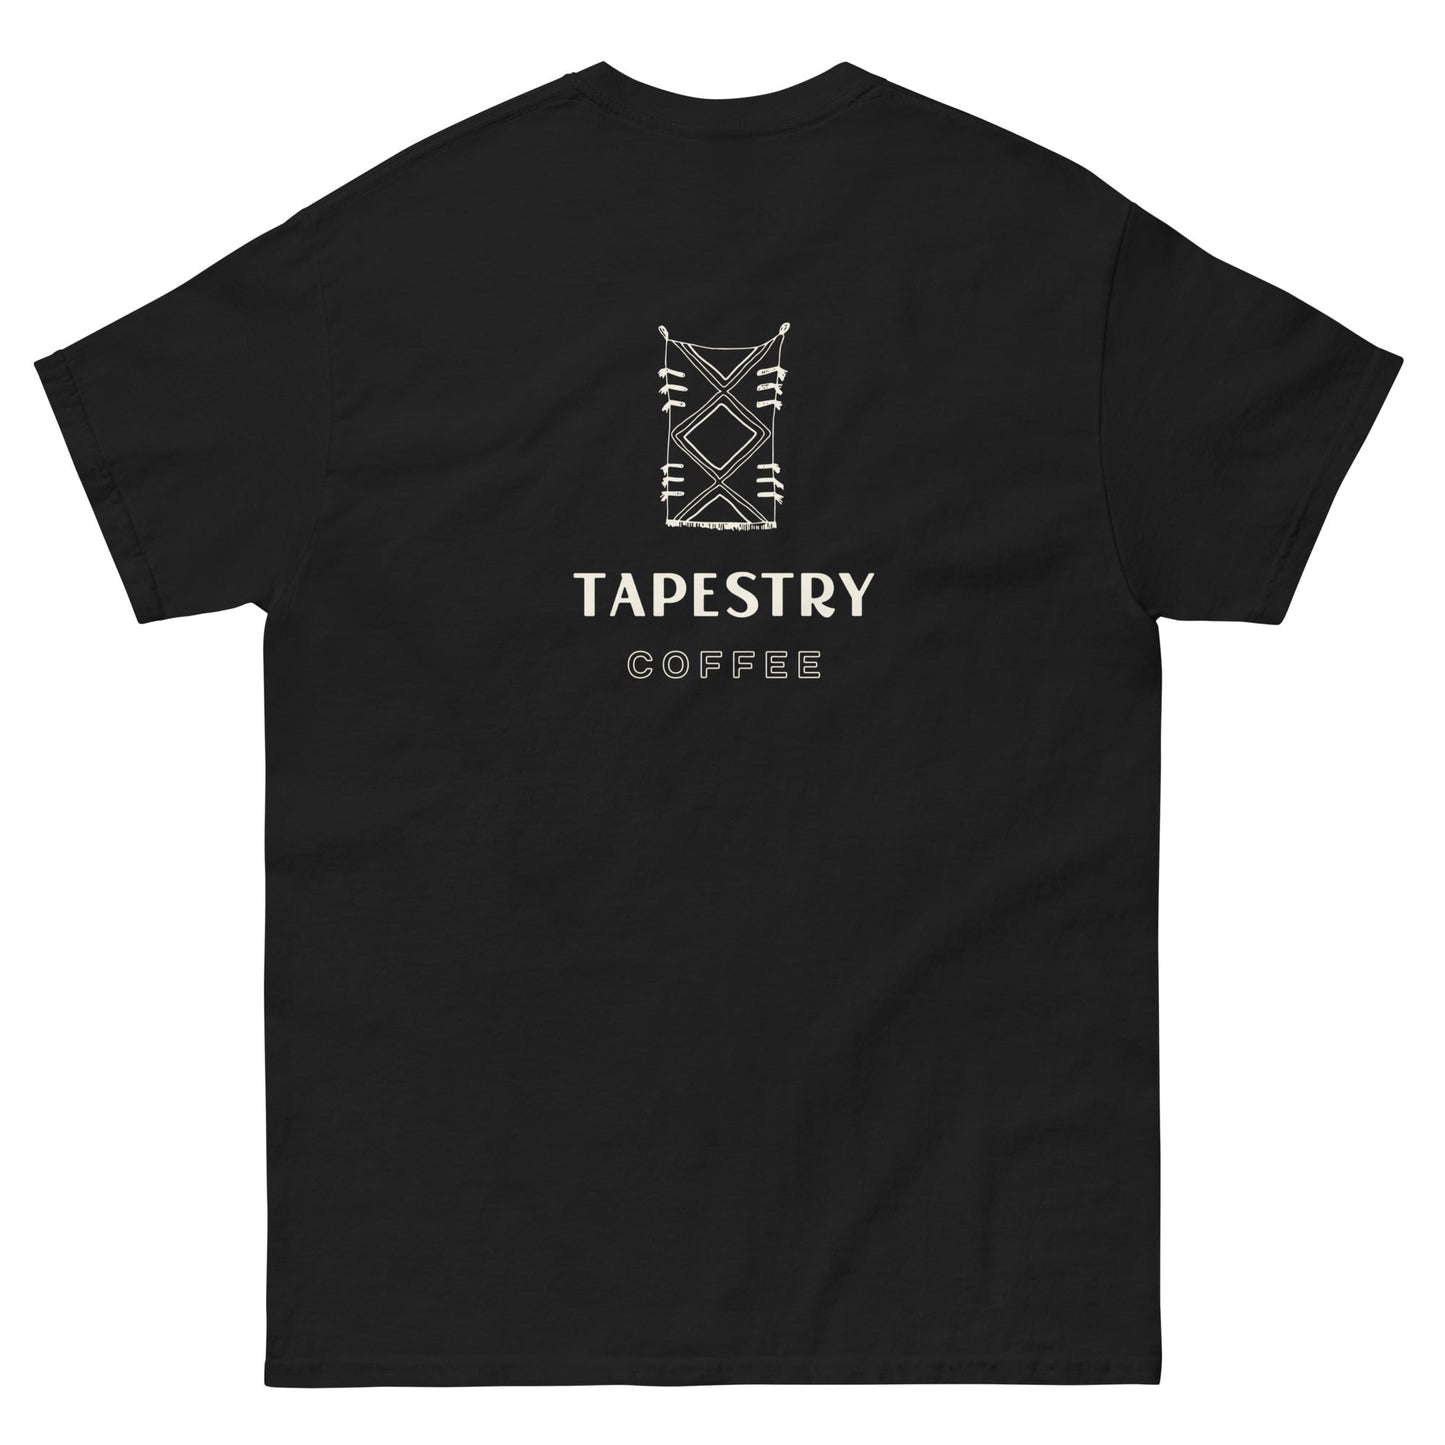 Tapestry T-Shirt - Black - Tapestry Coffee